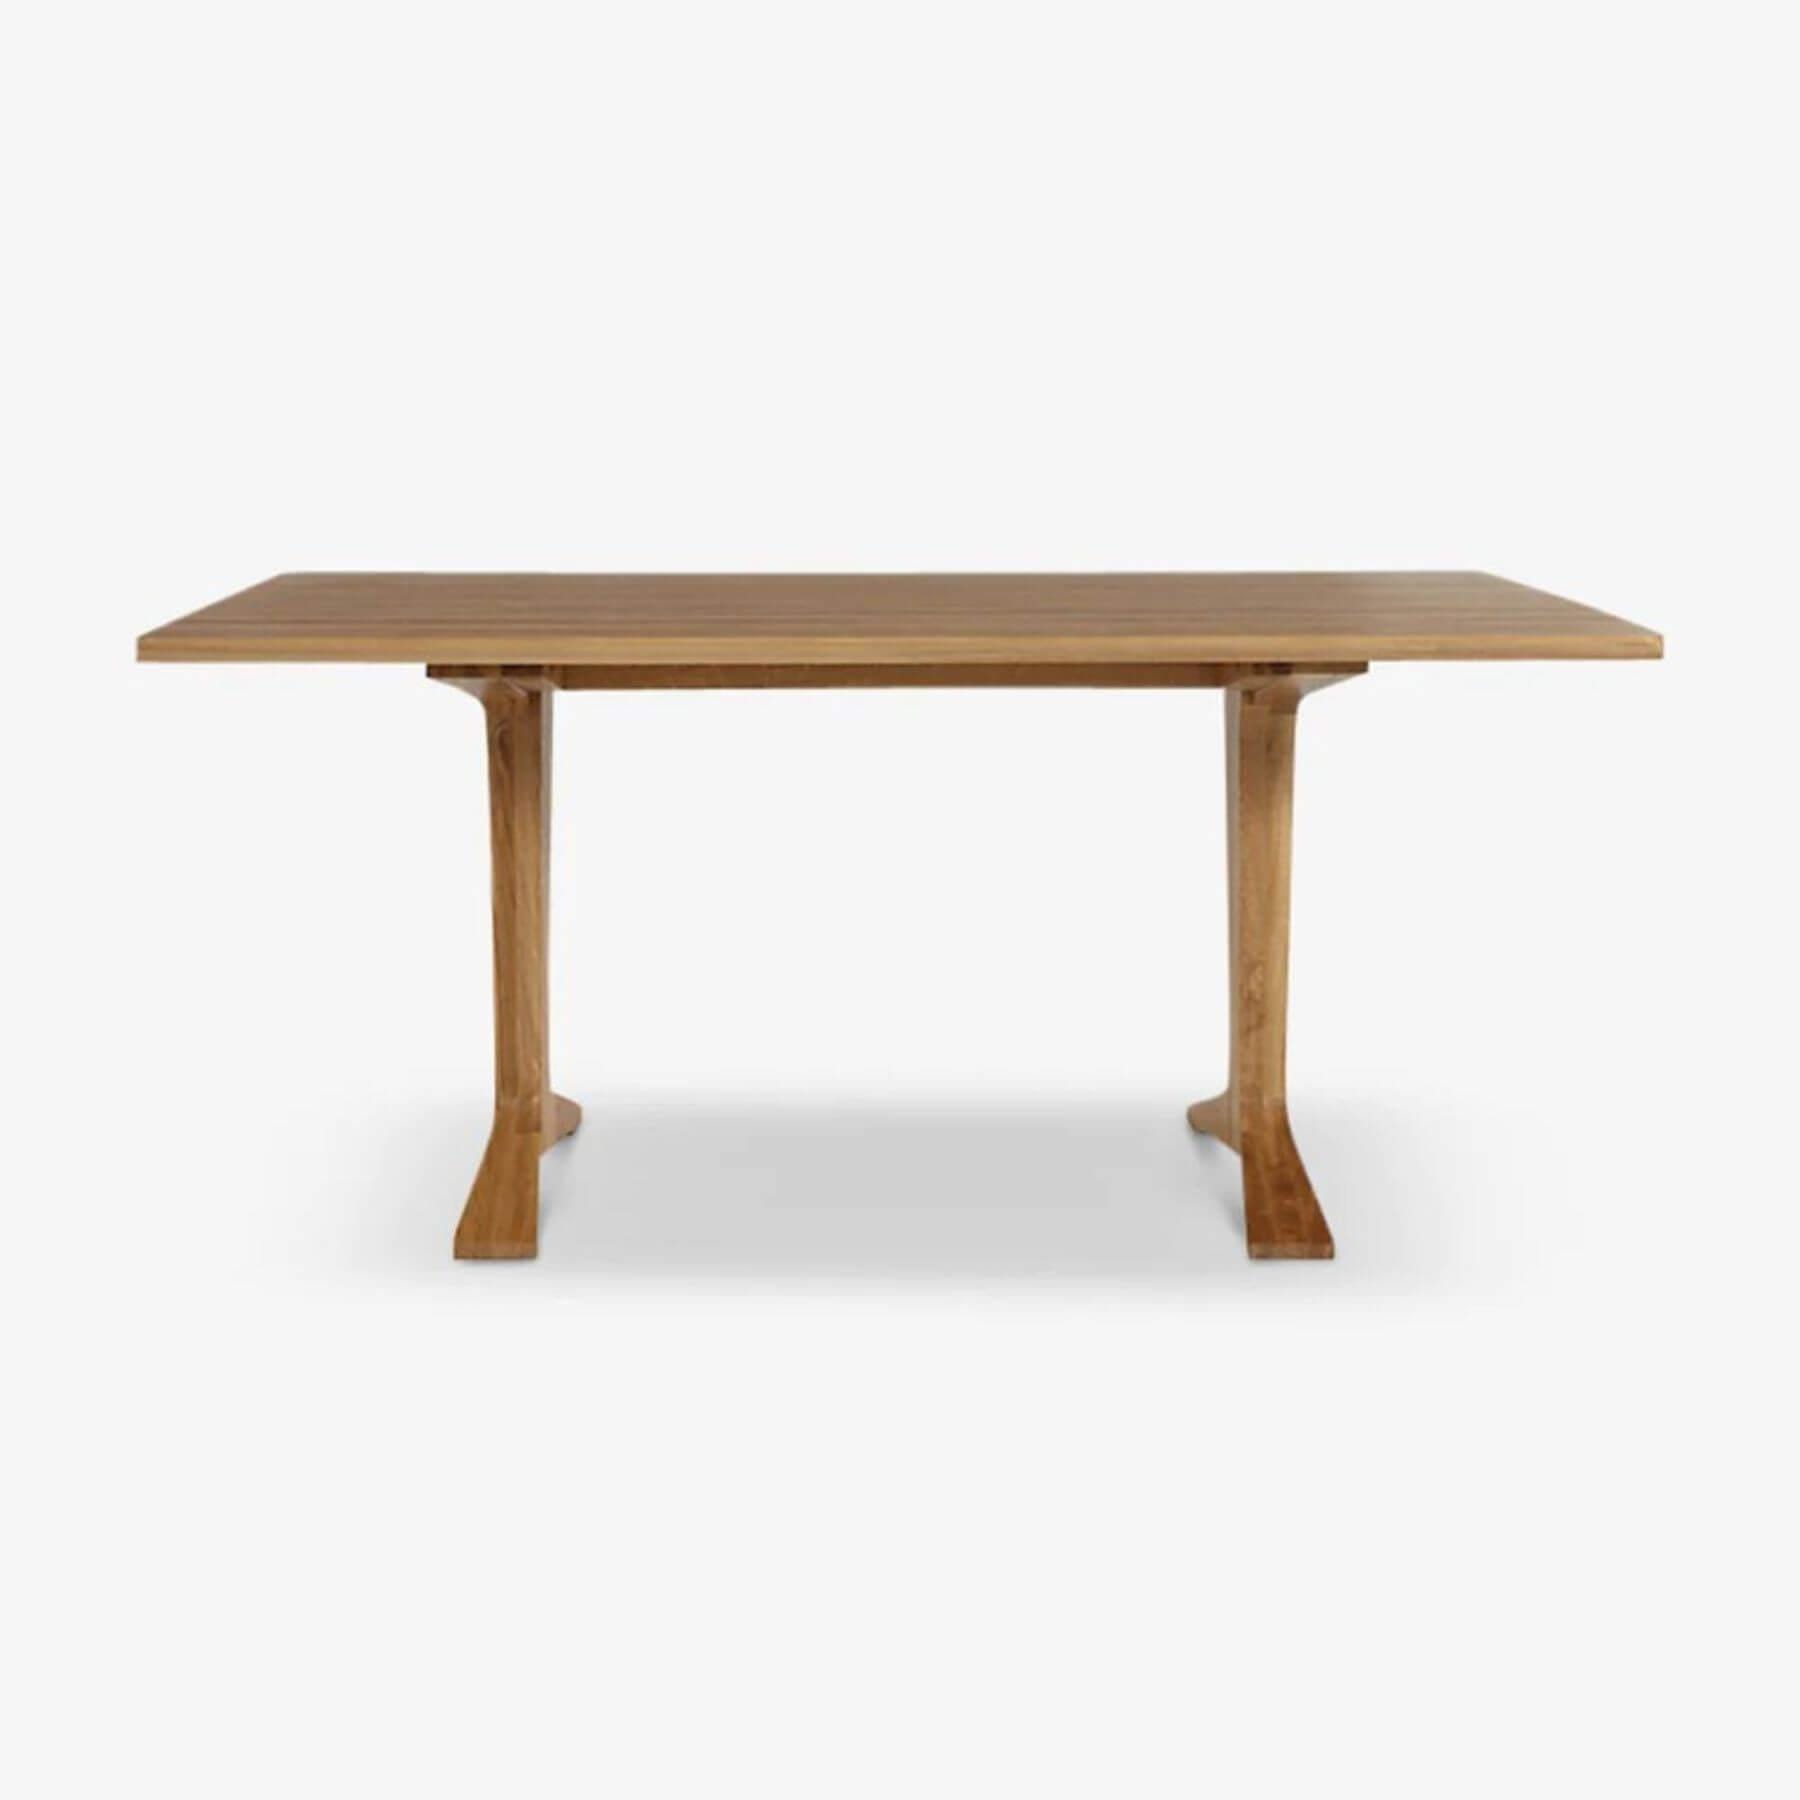 Case Furniture Ballet Dining Table Light Wood Designer Furniture From Holloways Of Ludlow